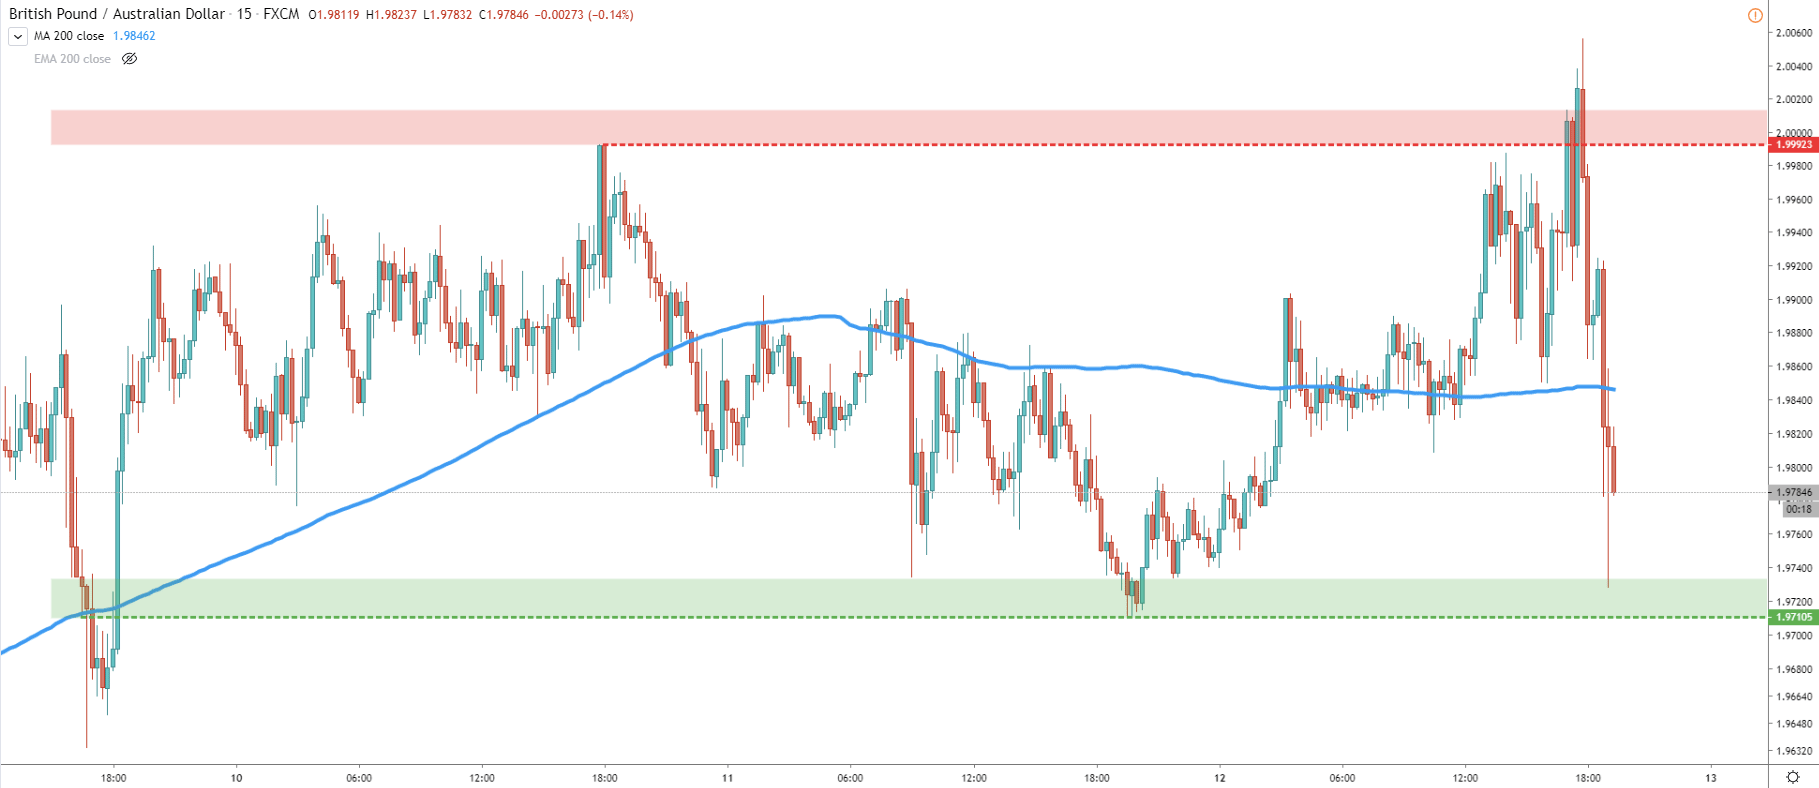 GBP/JPY 15-Minute Technical Analysis 13 Mar 2020